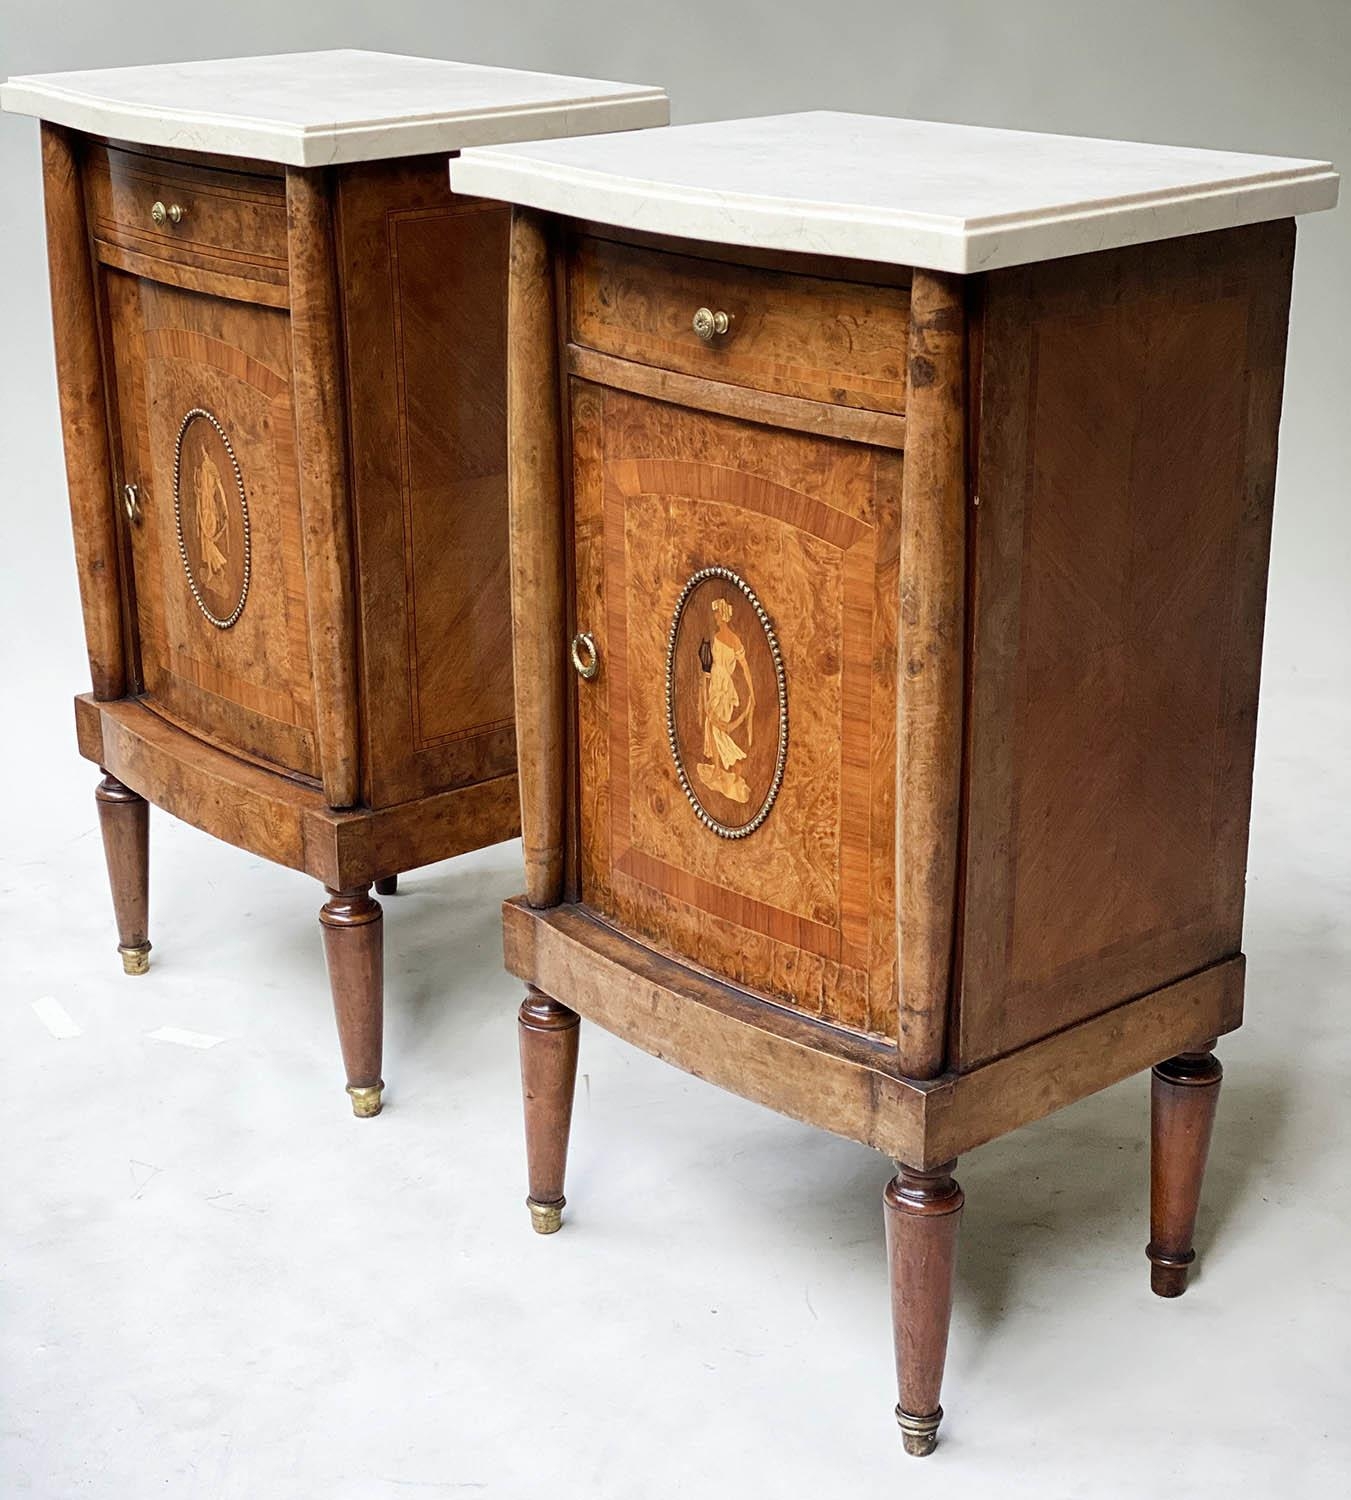 SIDE CABINETS, a pair, late 19th/early 20th century French burr walnut and gilt metal mounted, - Image 4 of 8